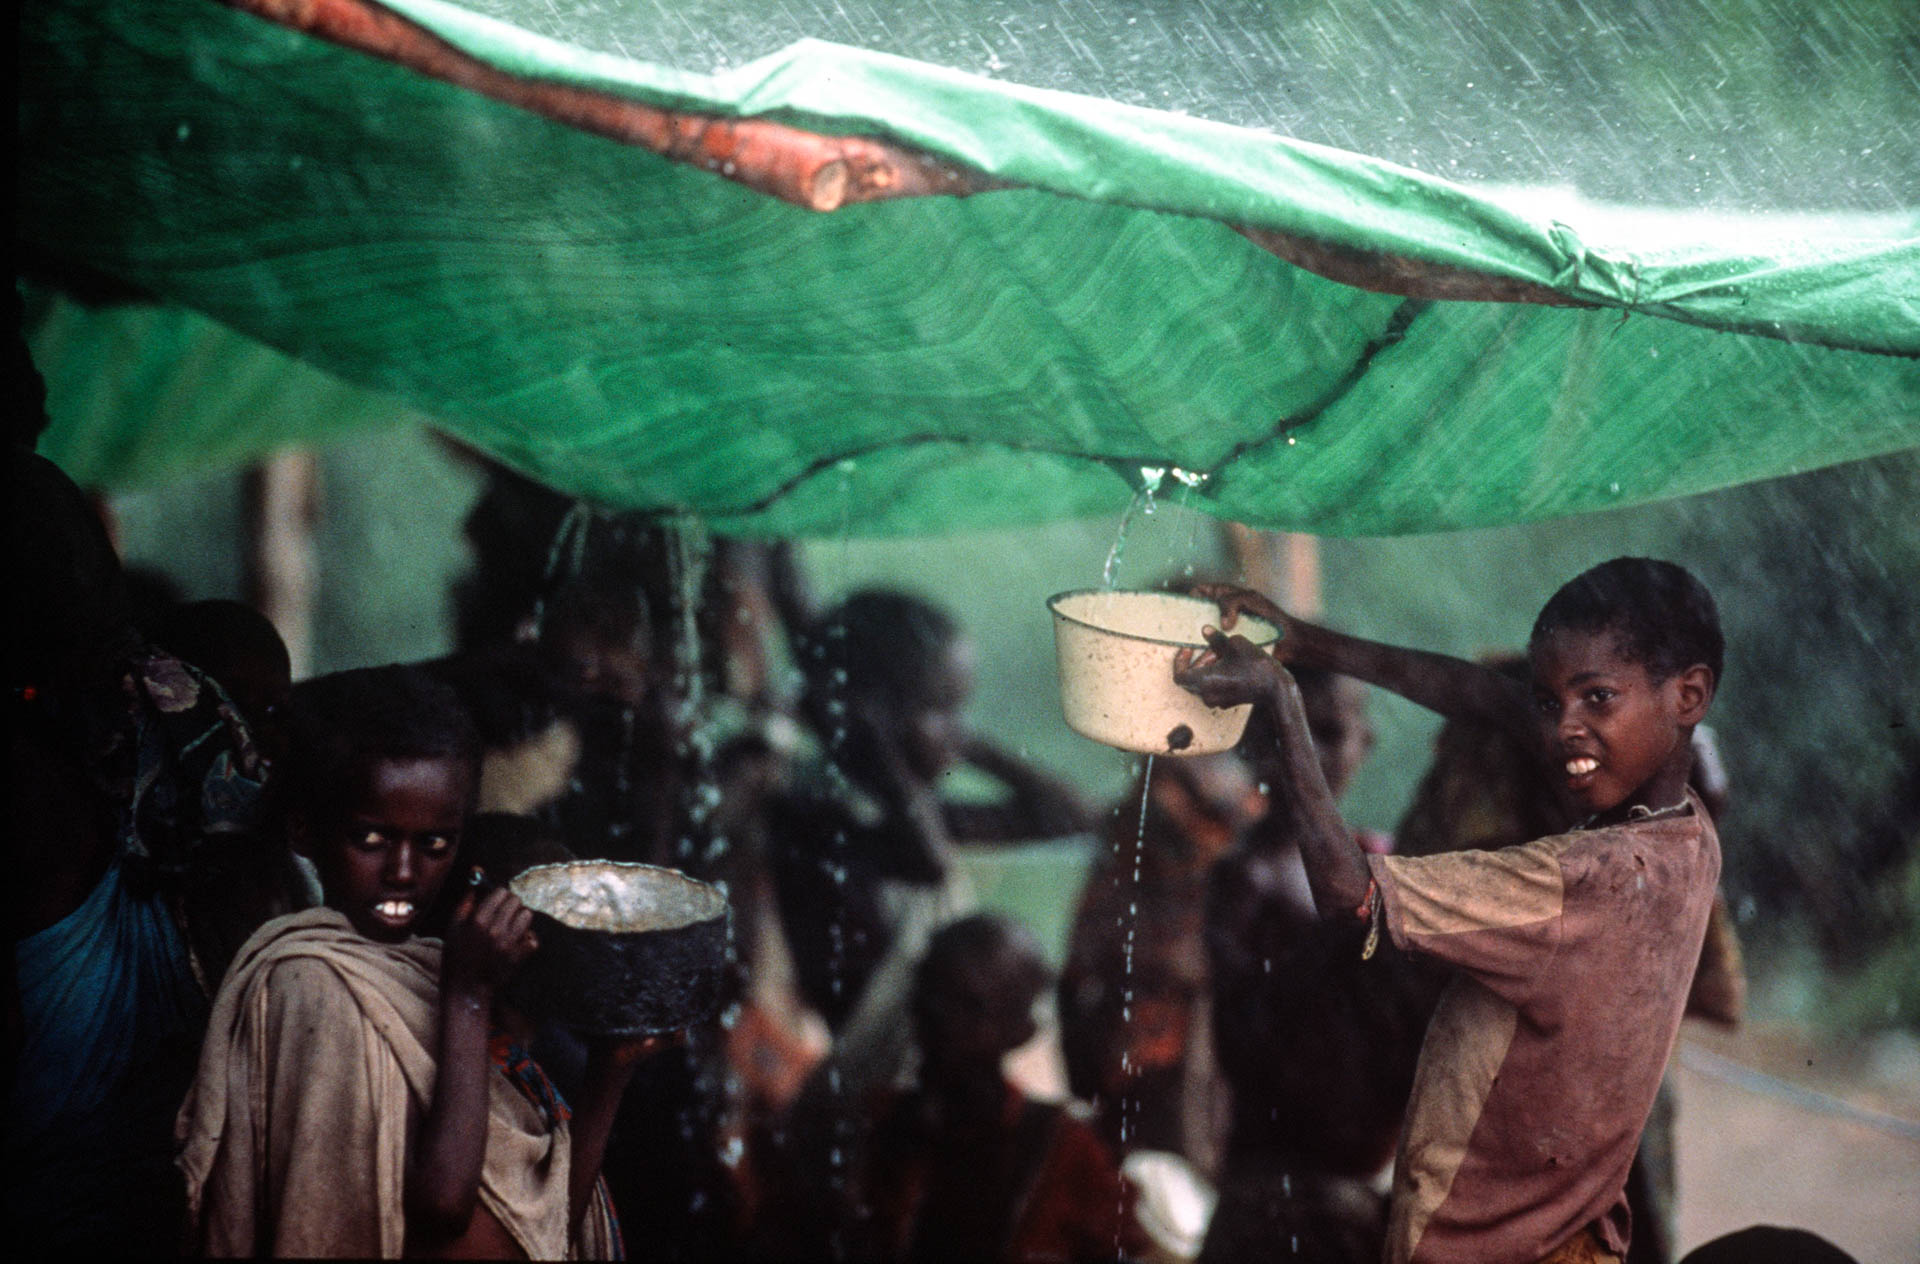  Bardera, Somalia - December 1992 
In Bardera the rain is an opportunity to have a bath and drink some fresh water. 